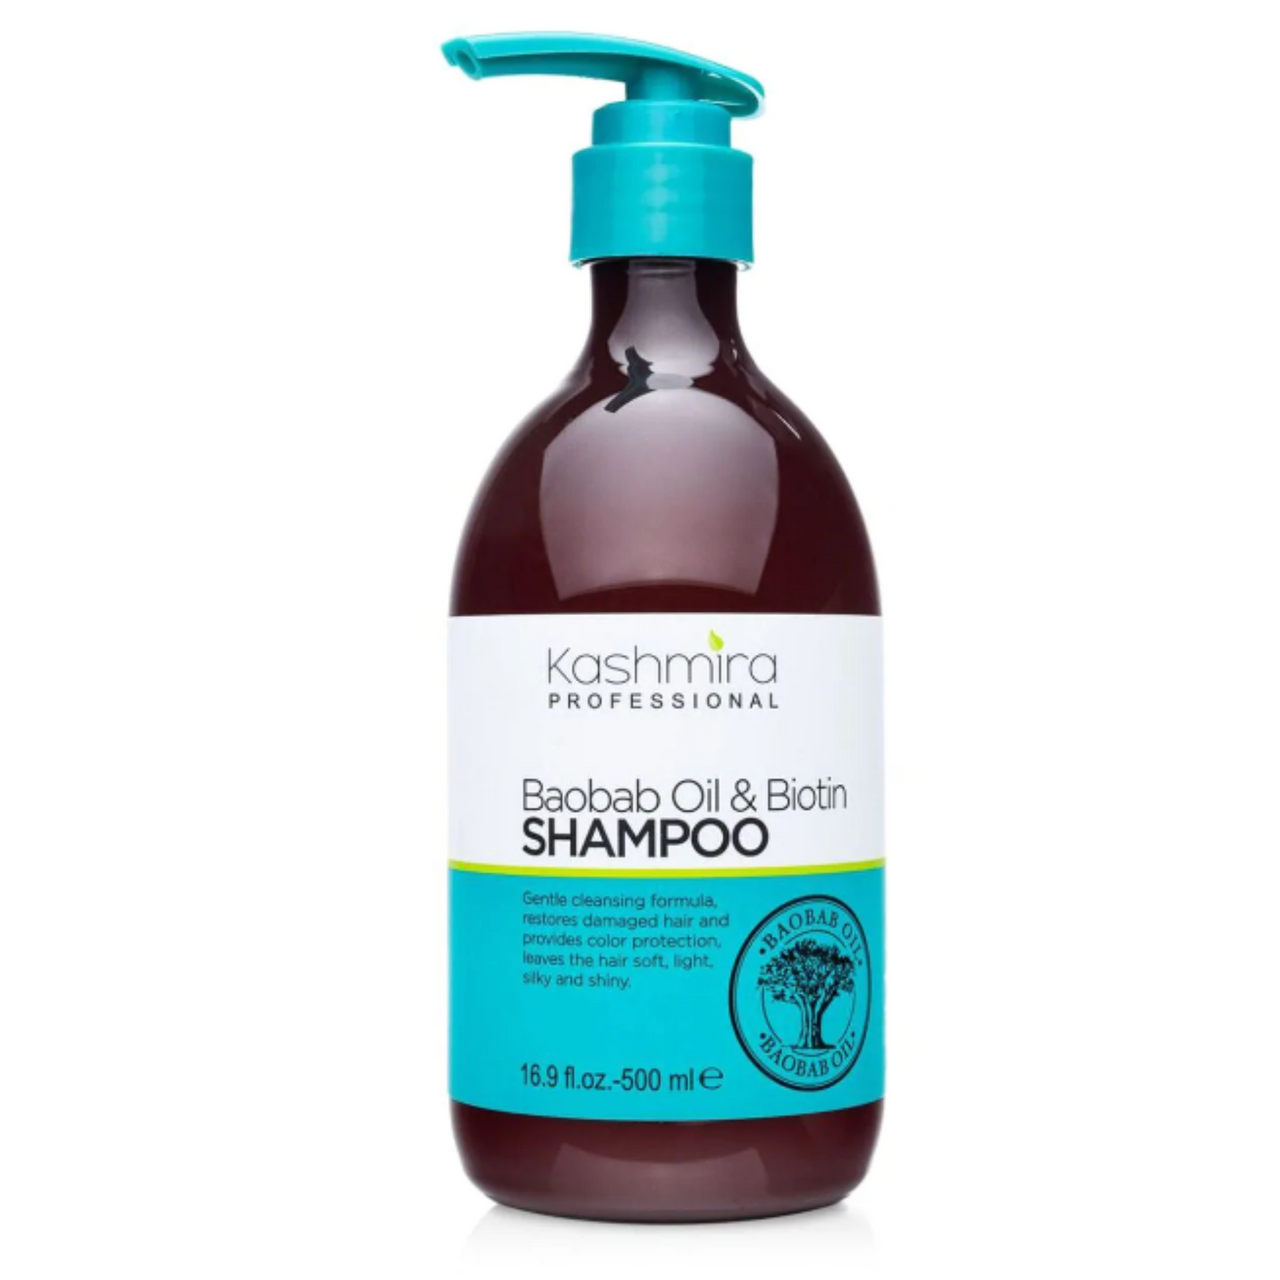 Kashmira Baobab Oil & Biotin Shampoo - Gentle Cleansing Formula, Restores Damaged Hair and Provides Color Protection, Results in Soft, Light, Silky and Shiny Hair